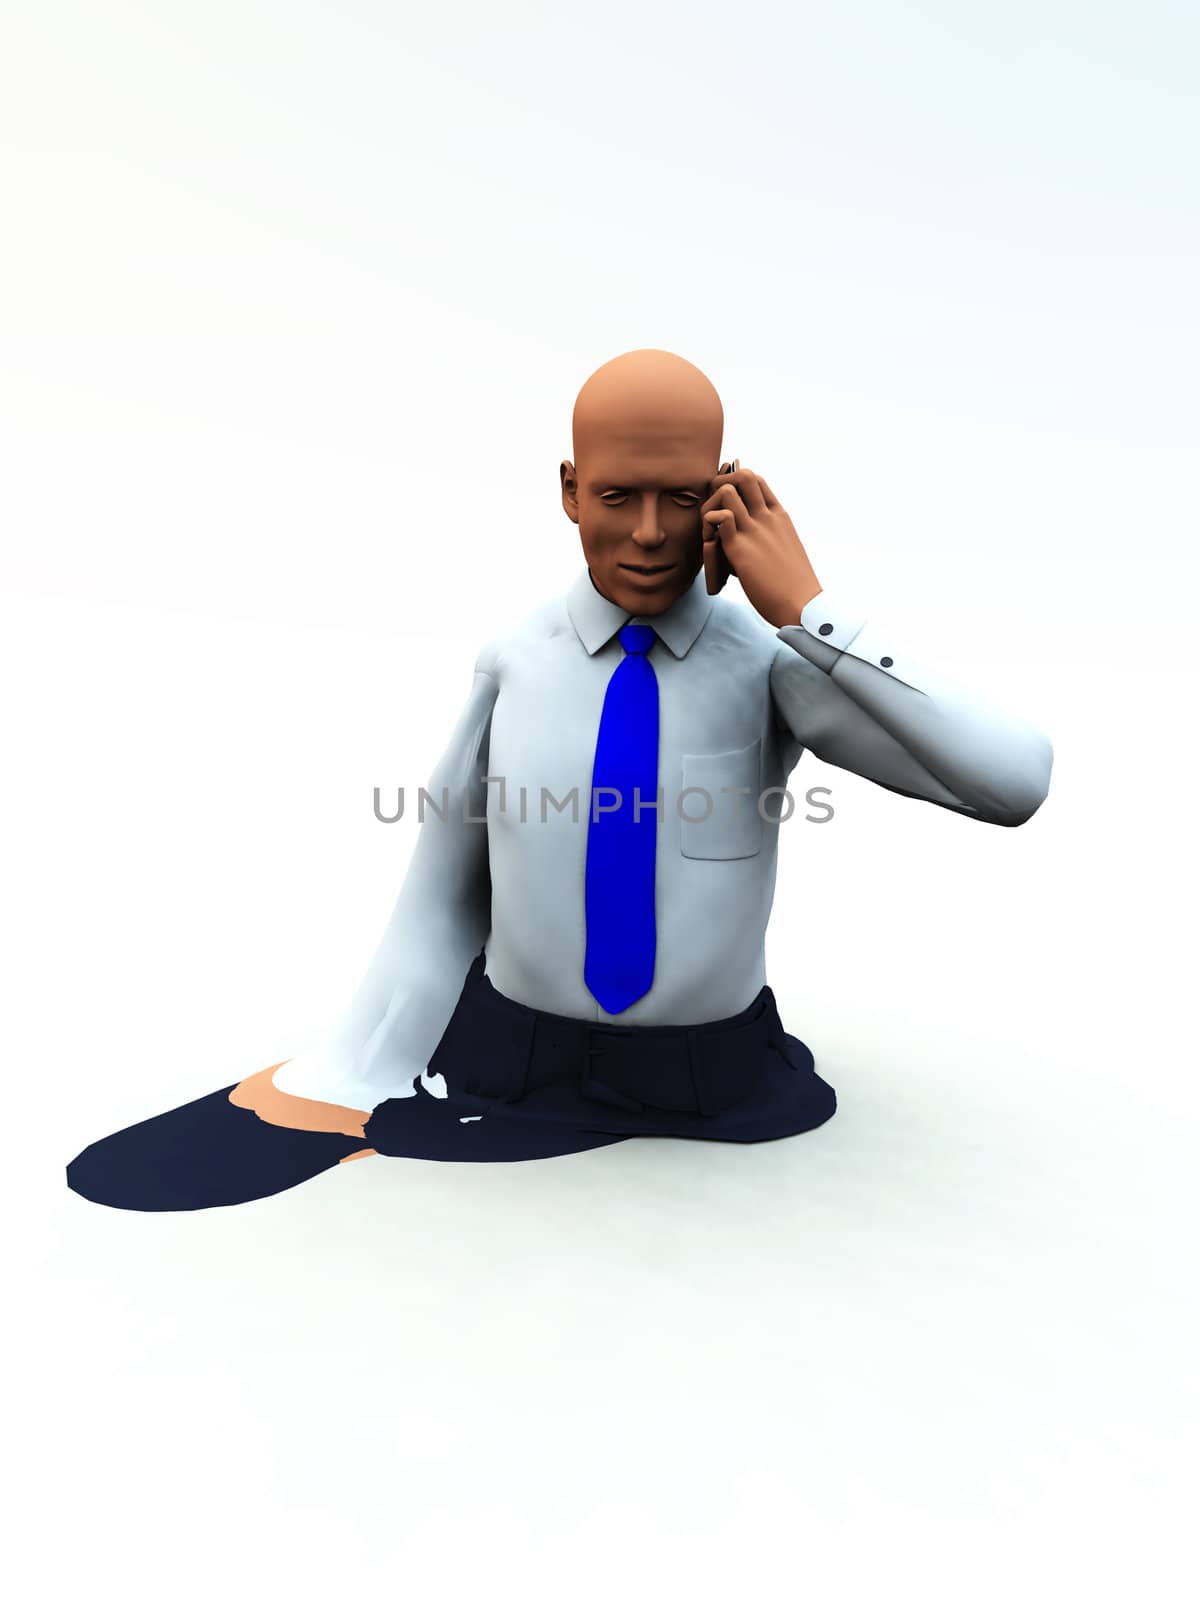 Conceptual image of a businessmen that is melting.